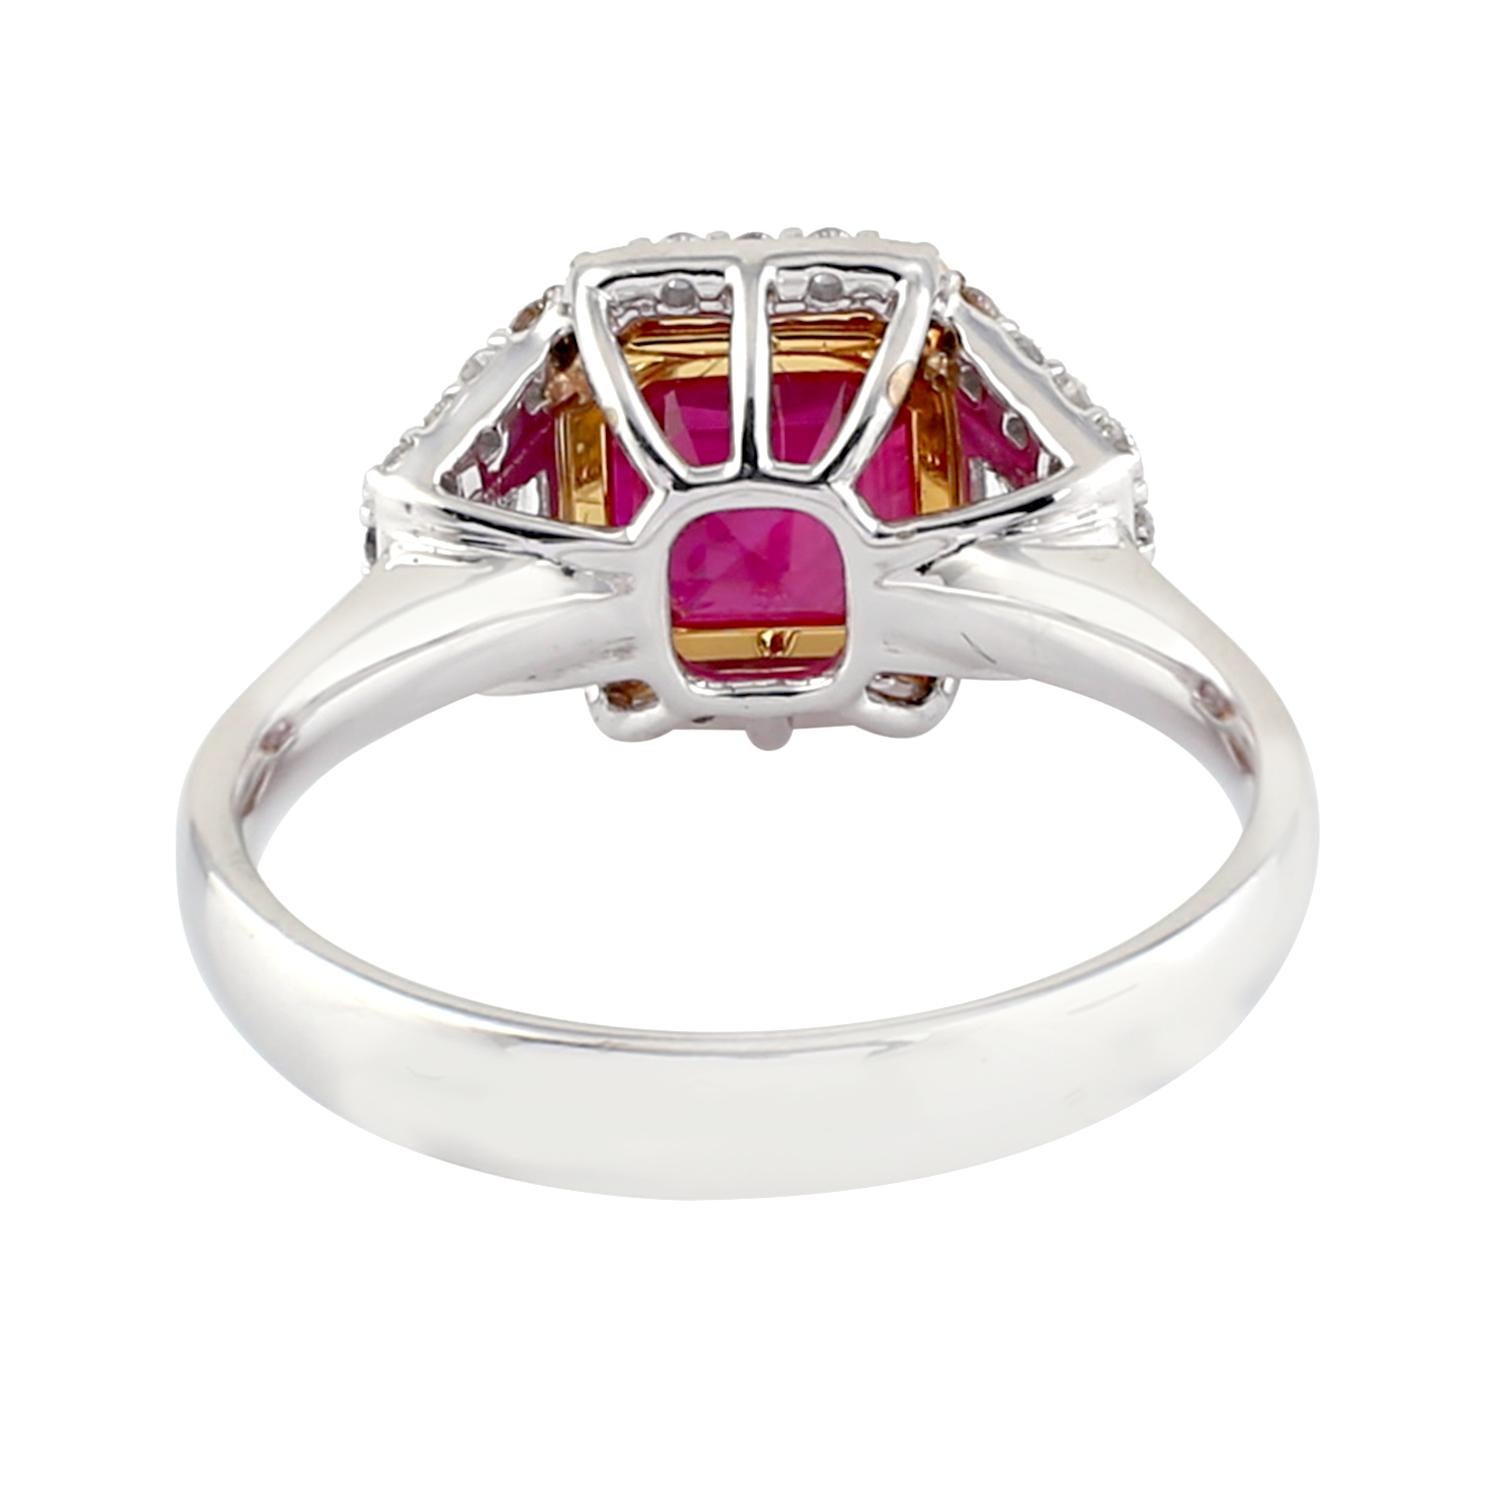 Modernist Cushion Shape Ruby Ring with Diamond Baguettes Set in 18 Karat White Gold